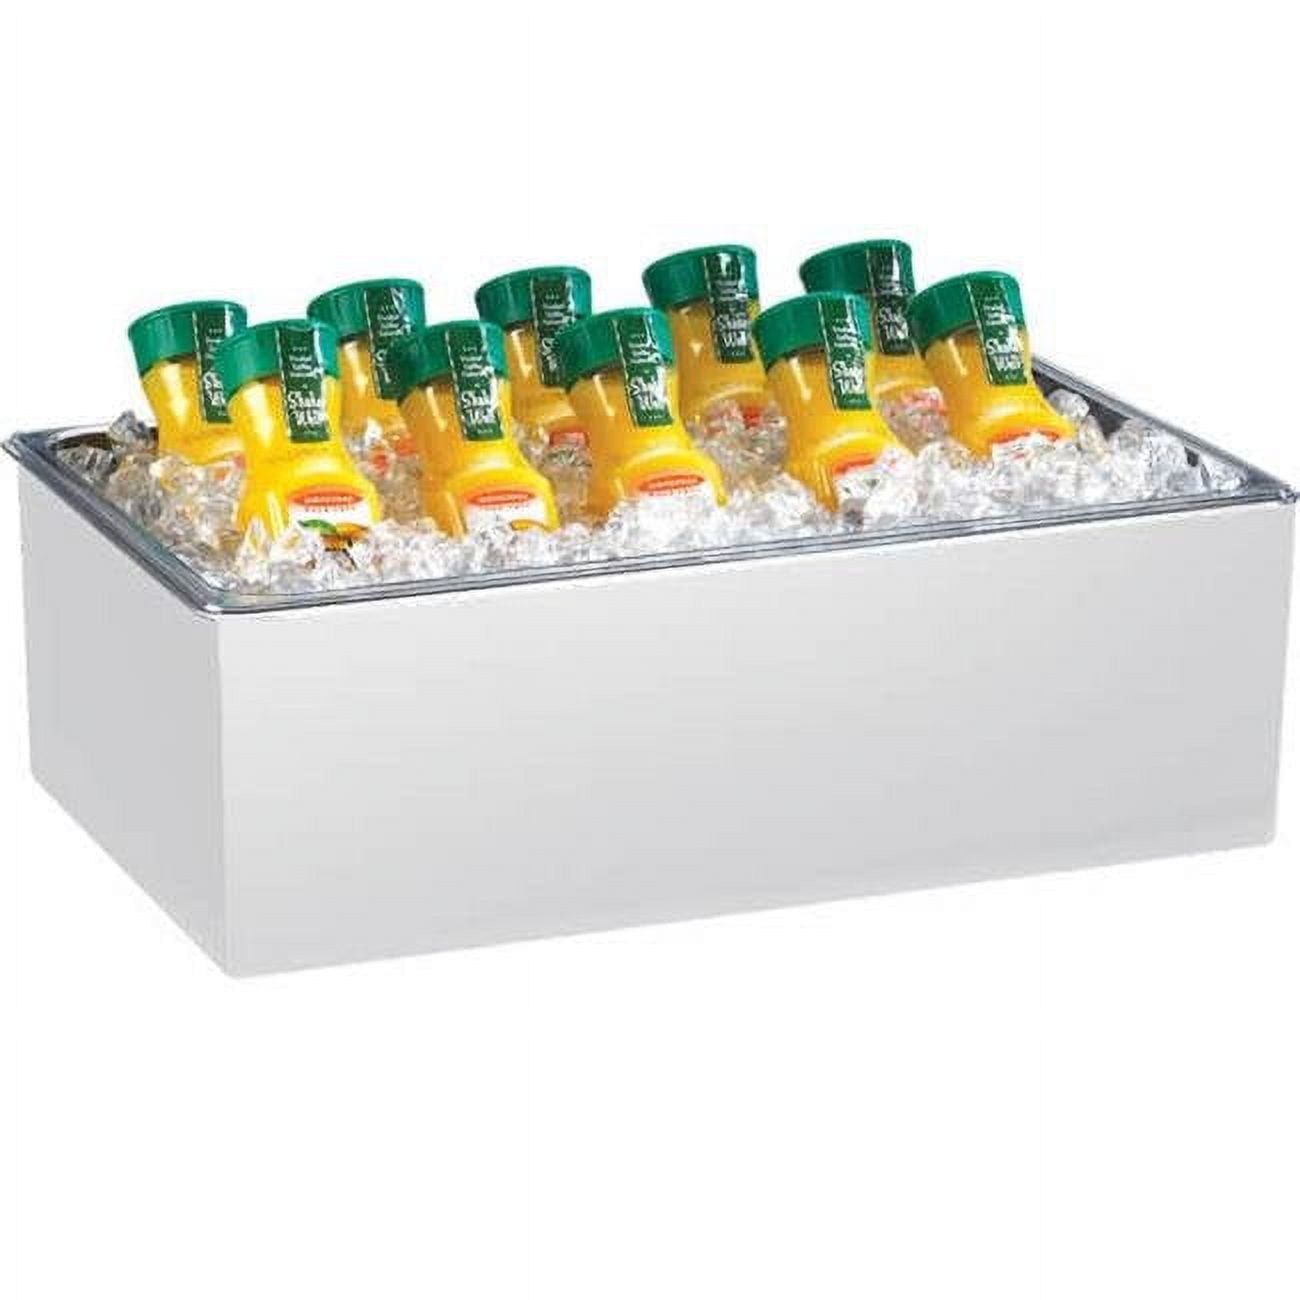 Picture of Cal Mil 475-10-15 White Melamine Ice Housing with Clear Pan - 10 x 12 x 7 in.